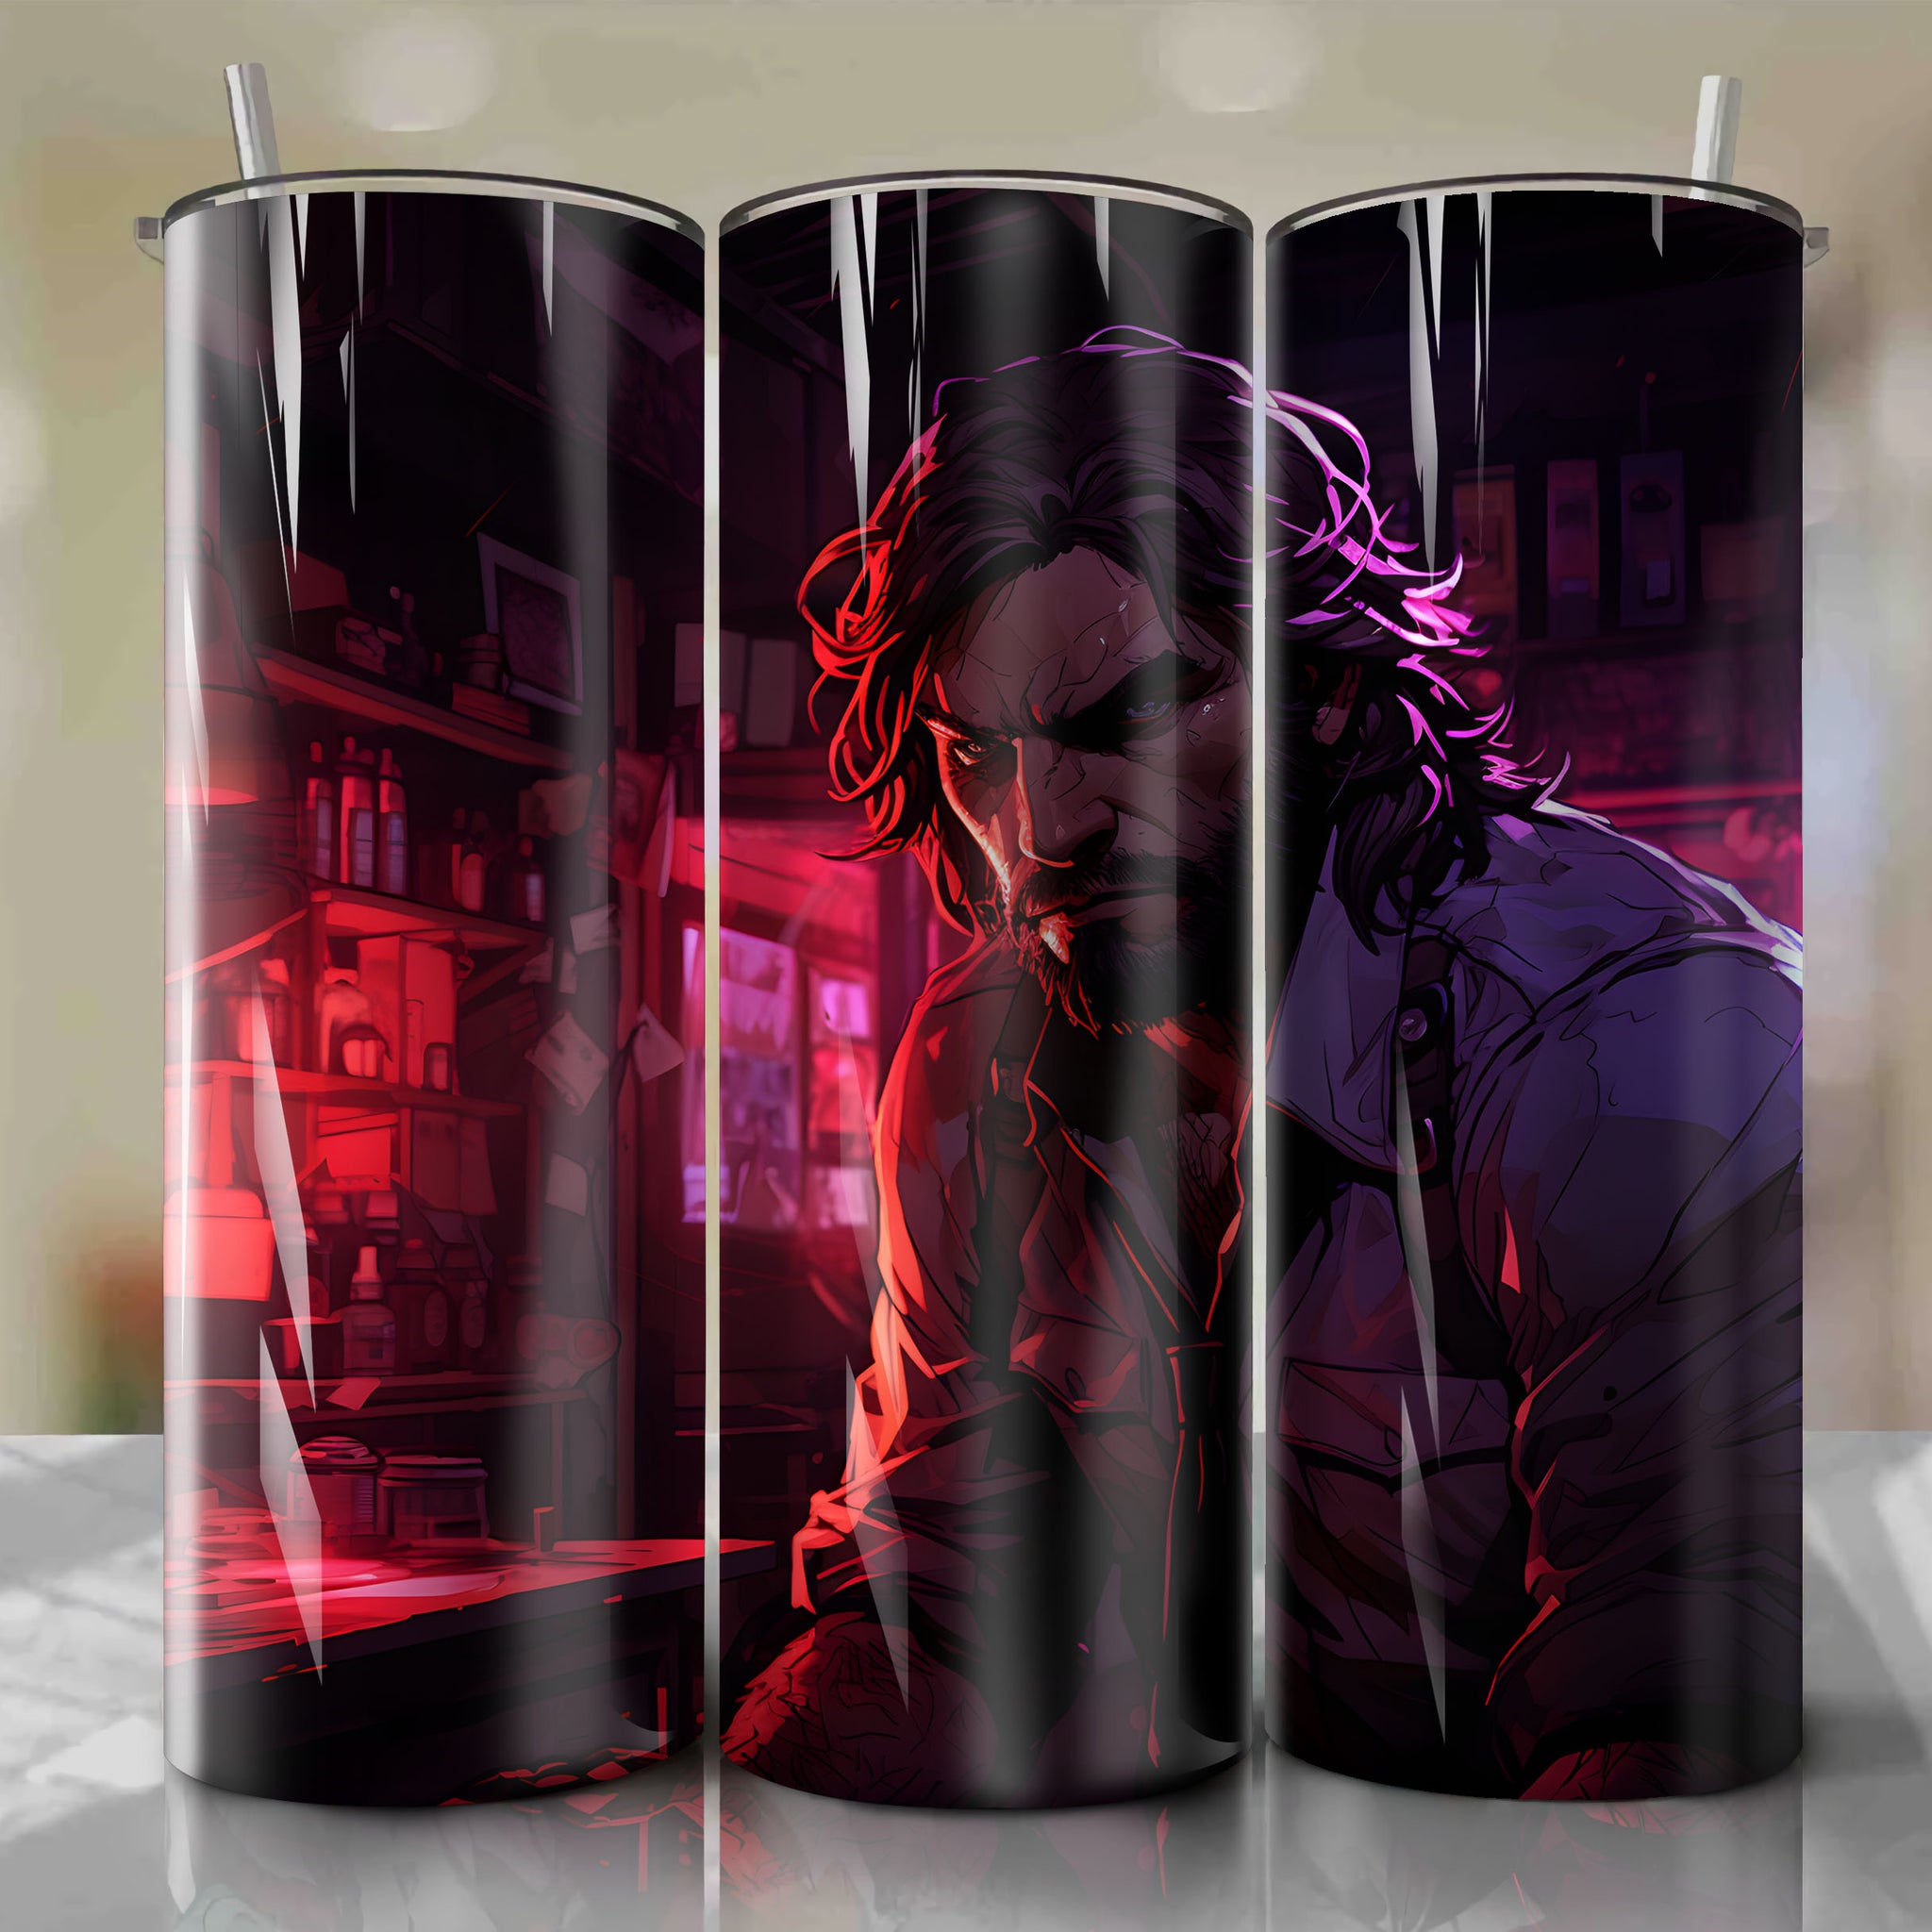 20 oz Tumbler Wrap - Durable and Stylish Tumbler Wrap for All-Day Refreshment
